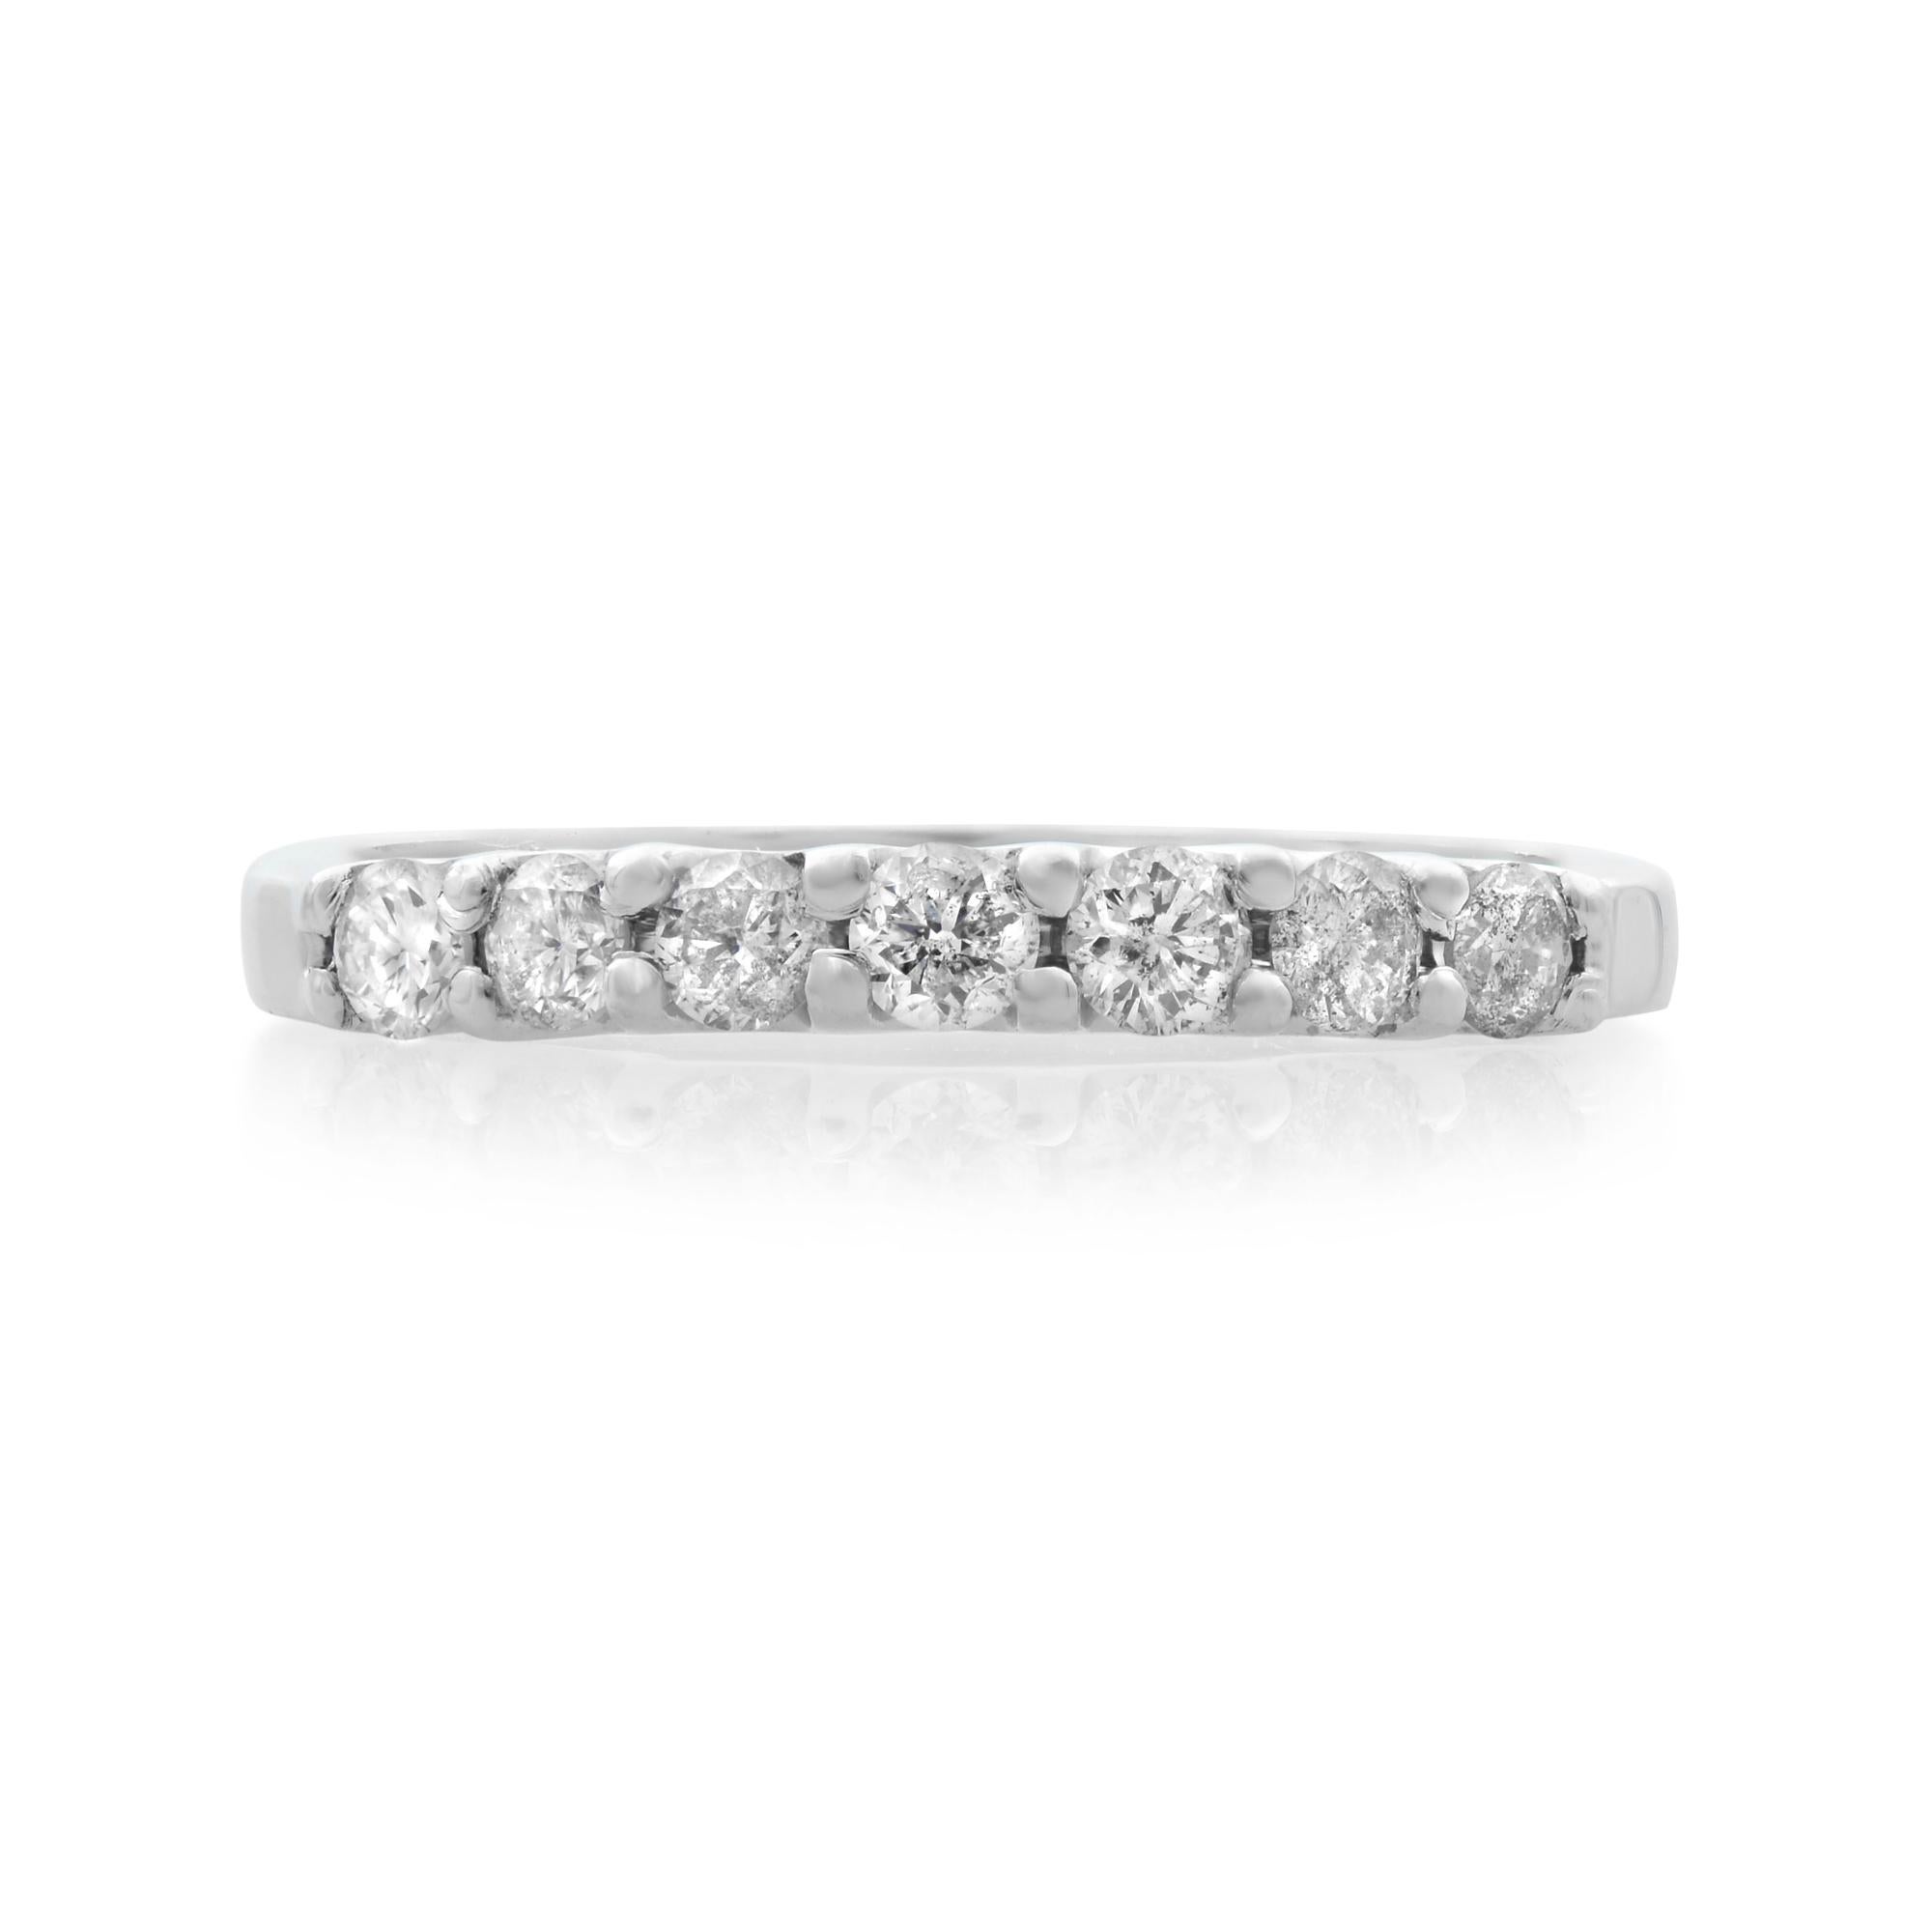 Round cut diamond wedding half eternity band in 14K white gold. There are 7 prong set diamonds approx. 0.25 carat in total. Diamond color H SI2 clarity. Band width: 2.20mm. Ring size 4.75. Comes with a presentable gift box.